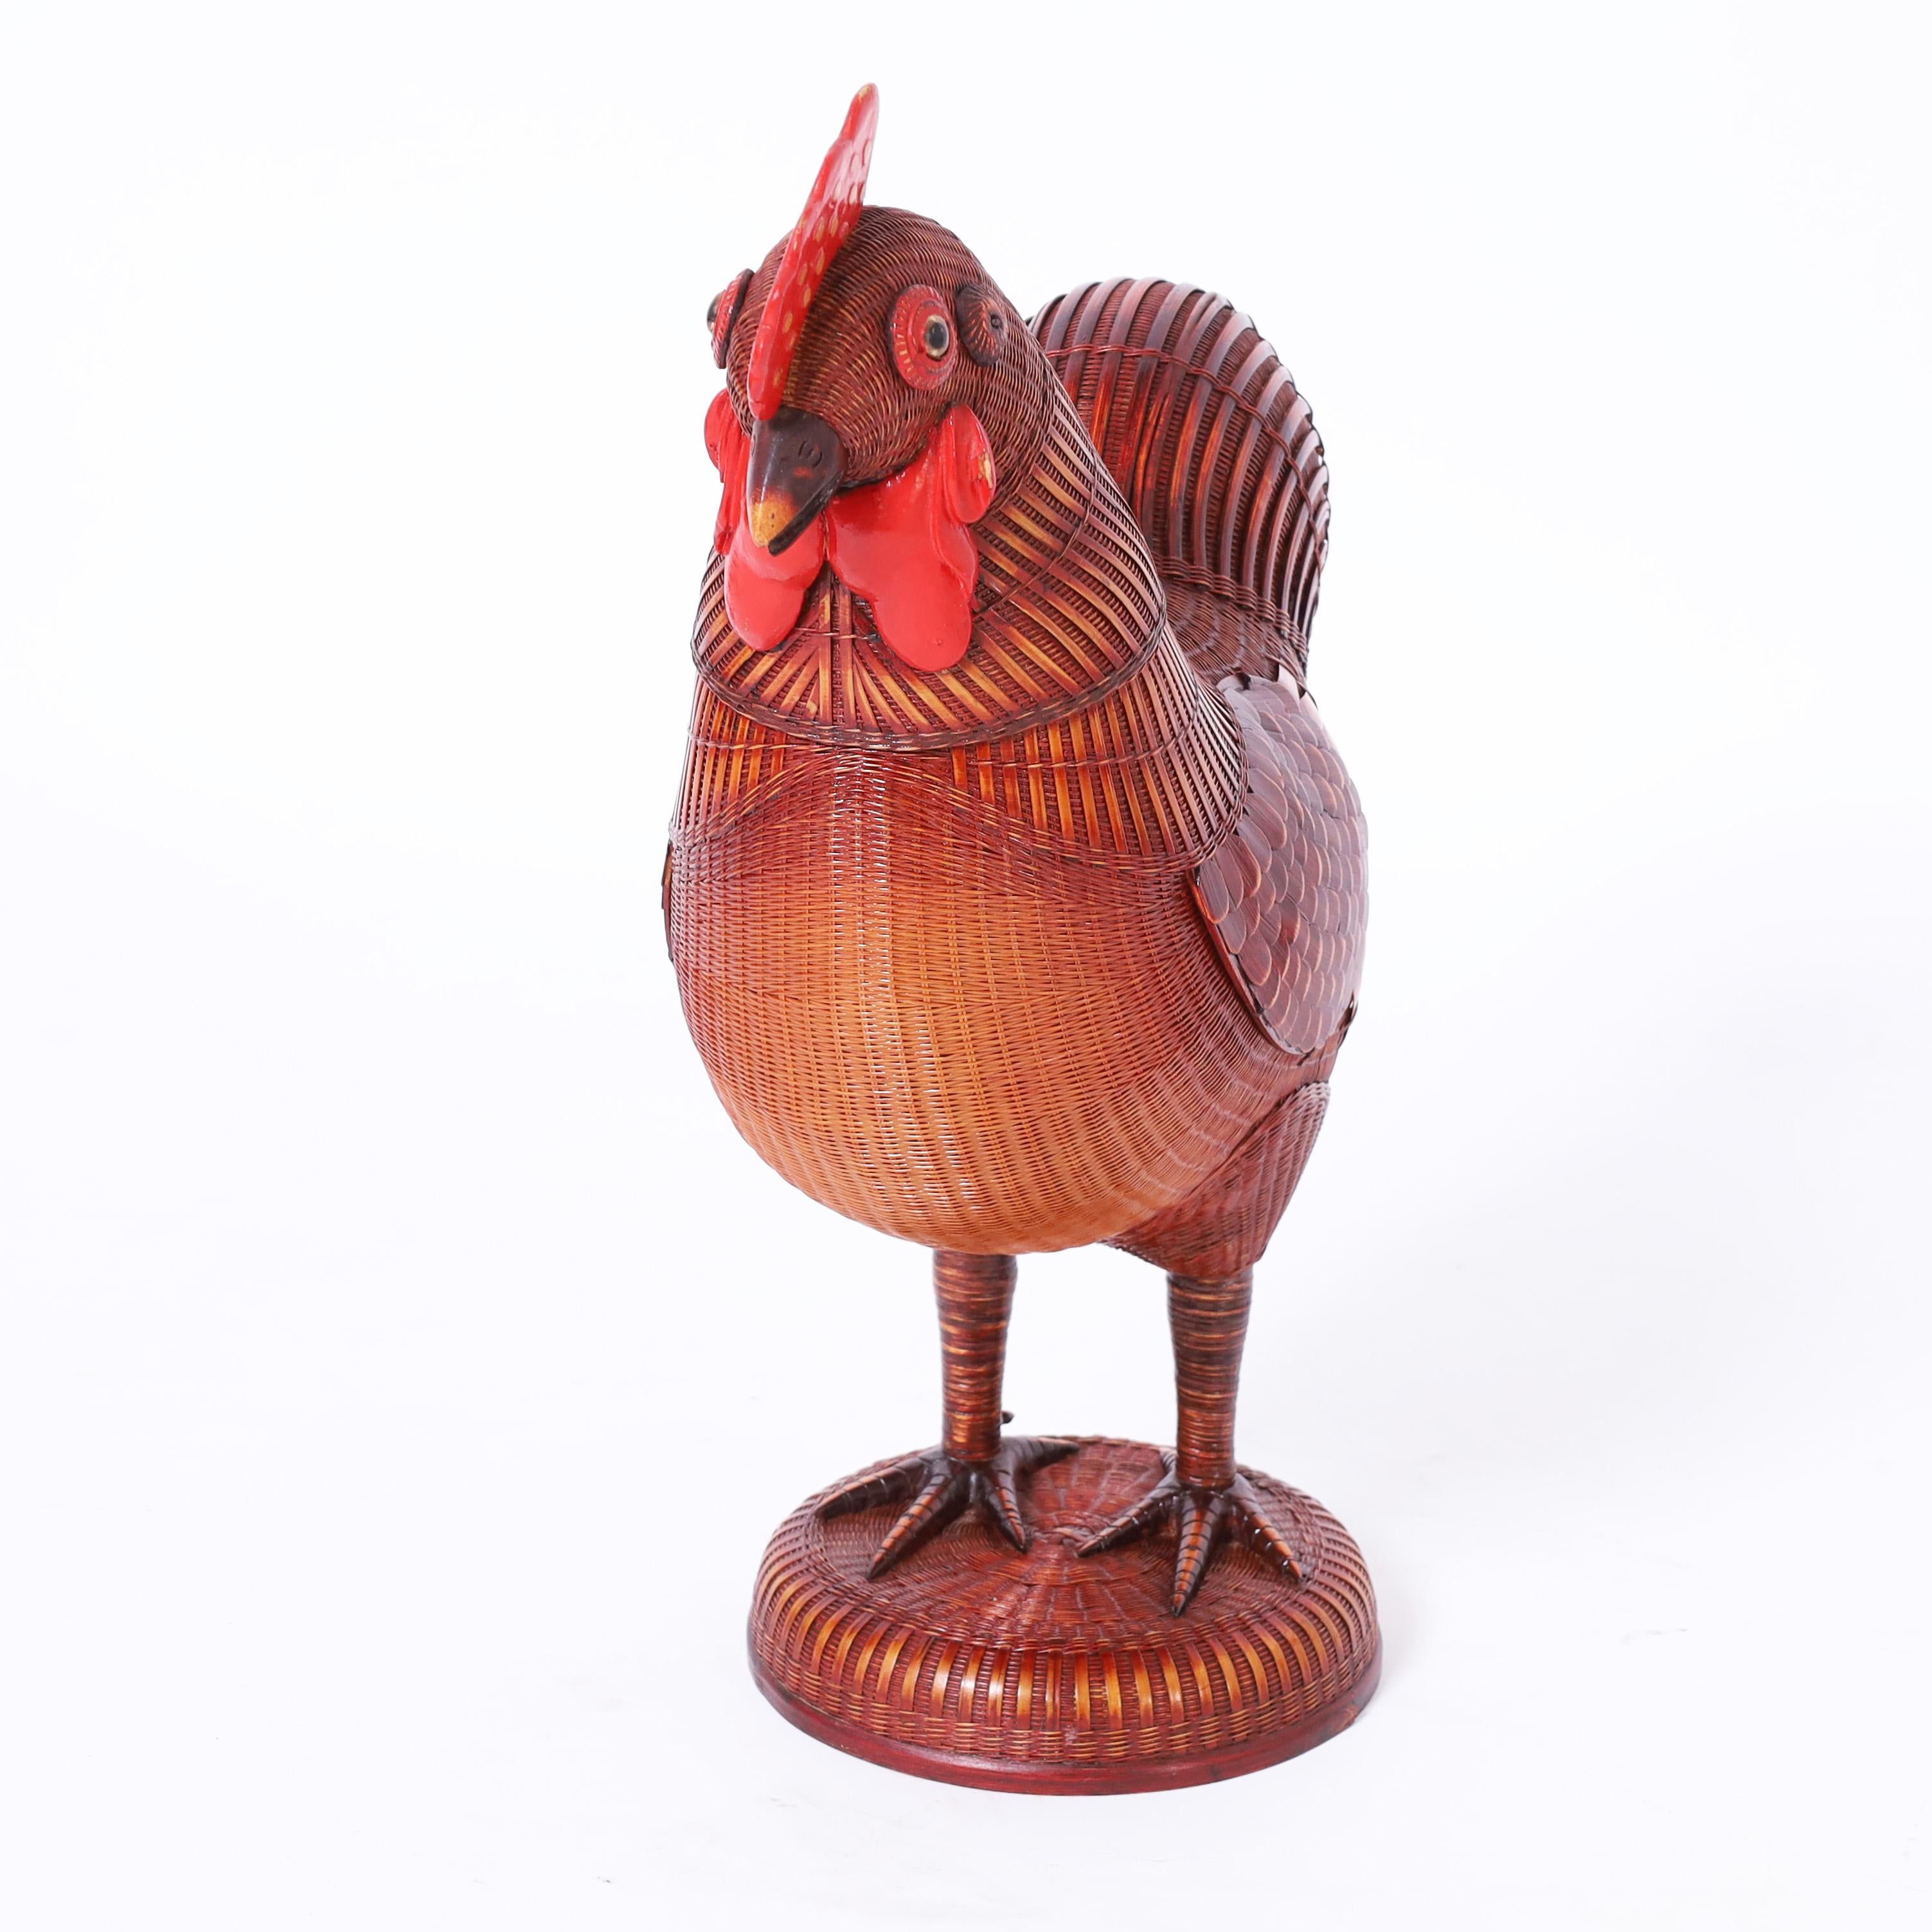 Charming vintage Chinese rooster and hen ambitiously hand crafted in wicker and reed with painted wood highlights and removable heads. From the famed Shanghai Collection.

From left to right:

H: 17 W: 14 D: 6

H: 15 W: 16 D: 7